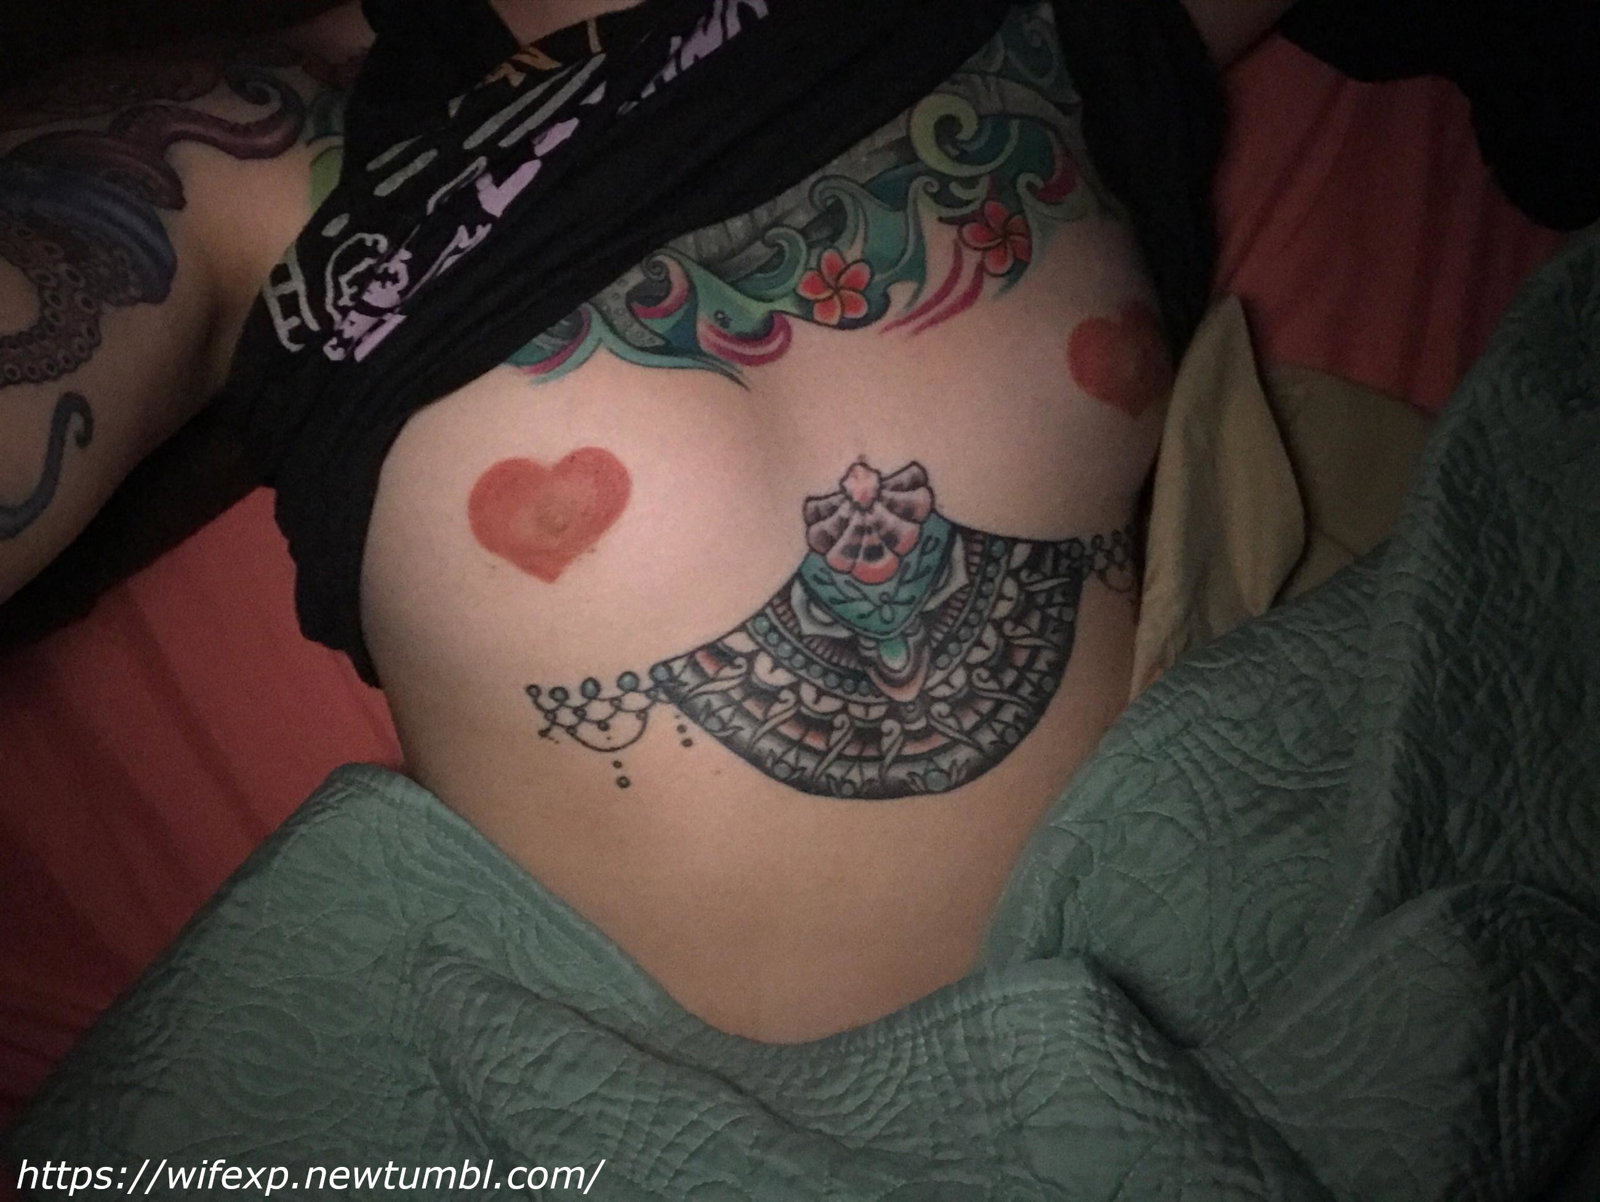 Watch the Photo by wifexp with the username @wifexp, posted on April 2, 2020. The post is about the topic Amateurs. and the text says '#wife #wifexp #amateur #homemade #tits #boobs #nipples #selfie #vixen #tattoo #tattoos #NSFW #exposed'